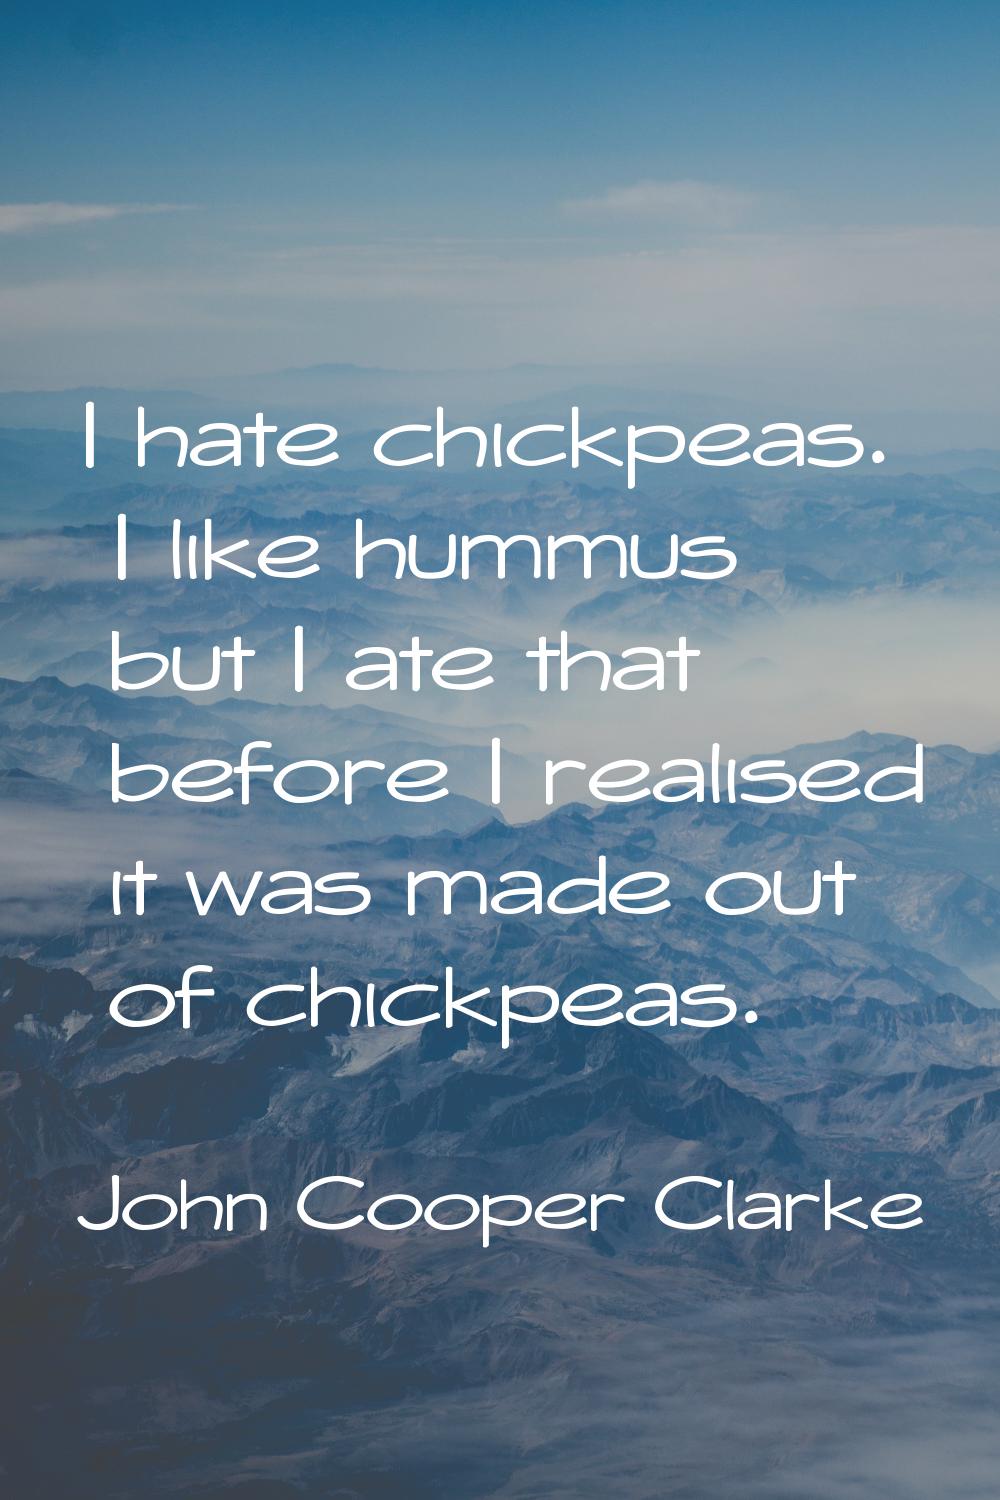 I hate chickpeas. I like hummus but I ate that before I realised it was made out of chickpeas.